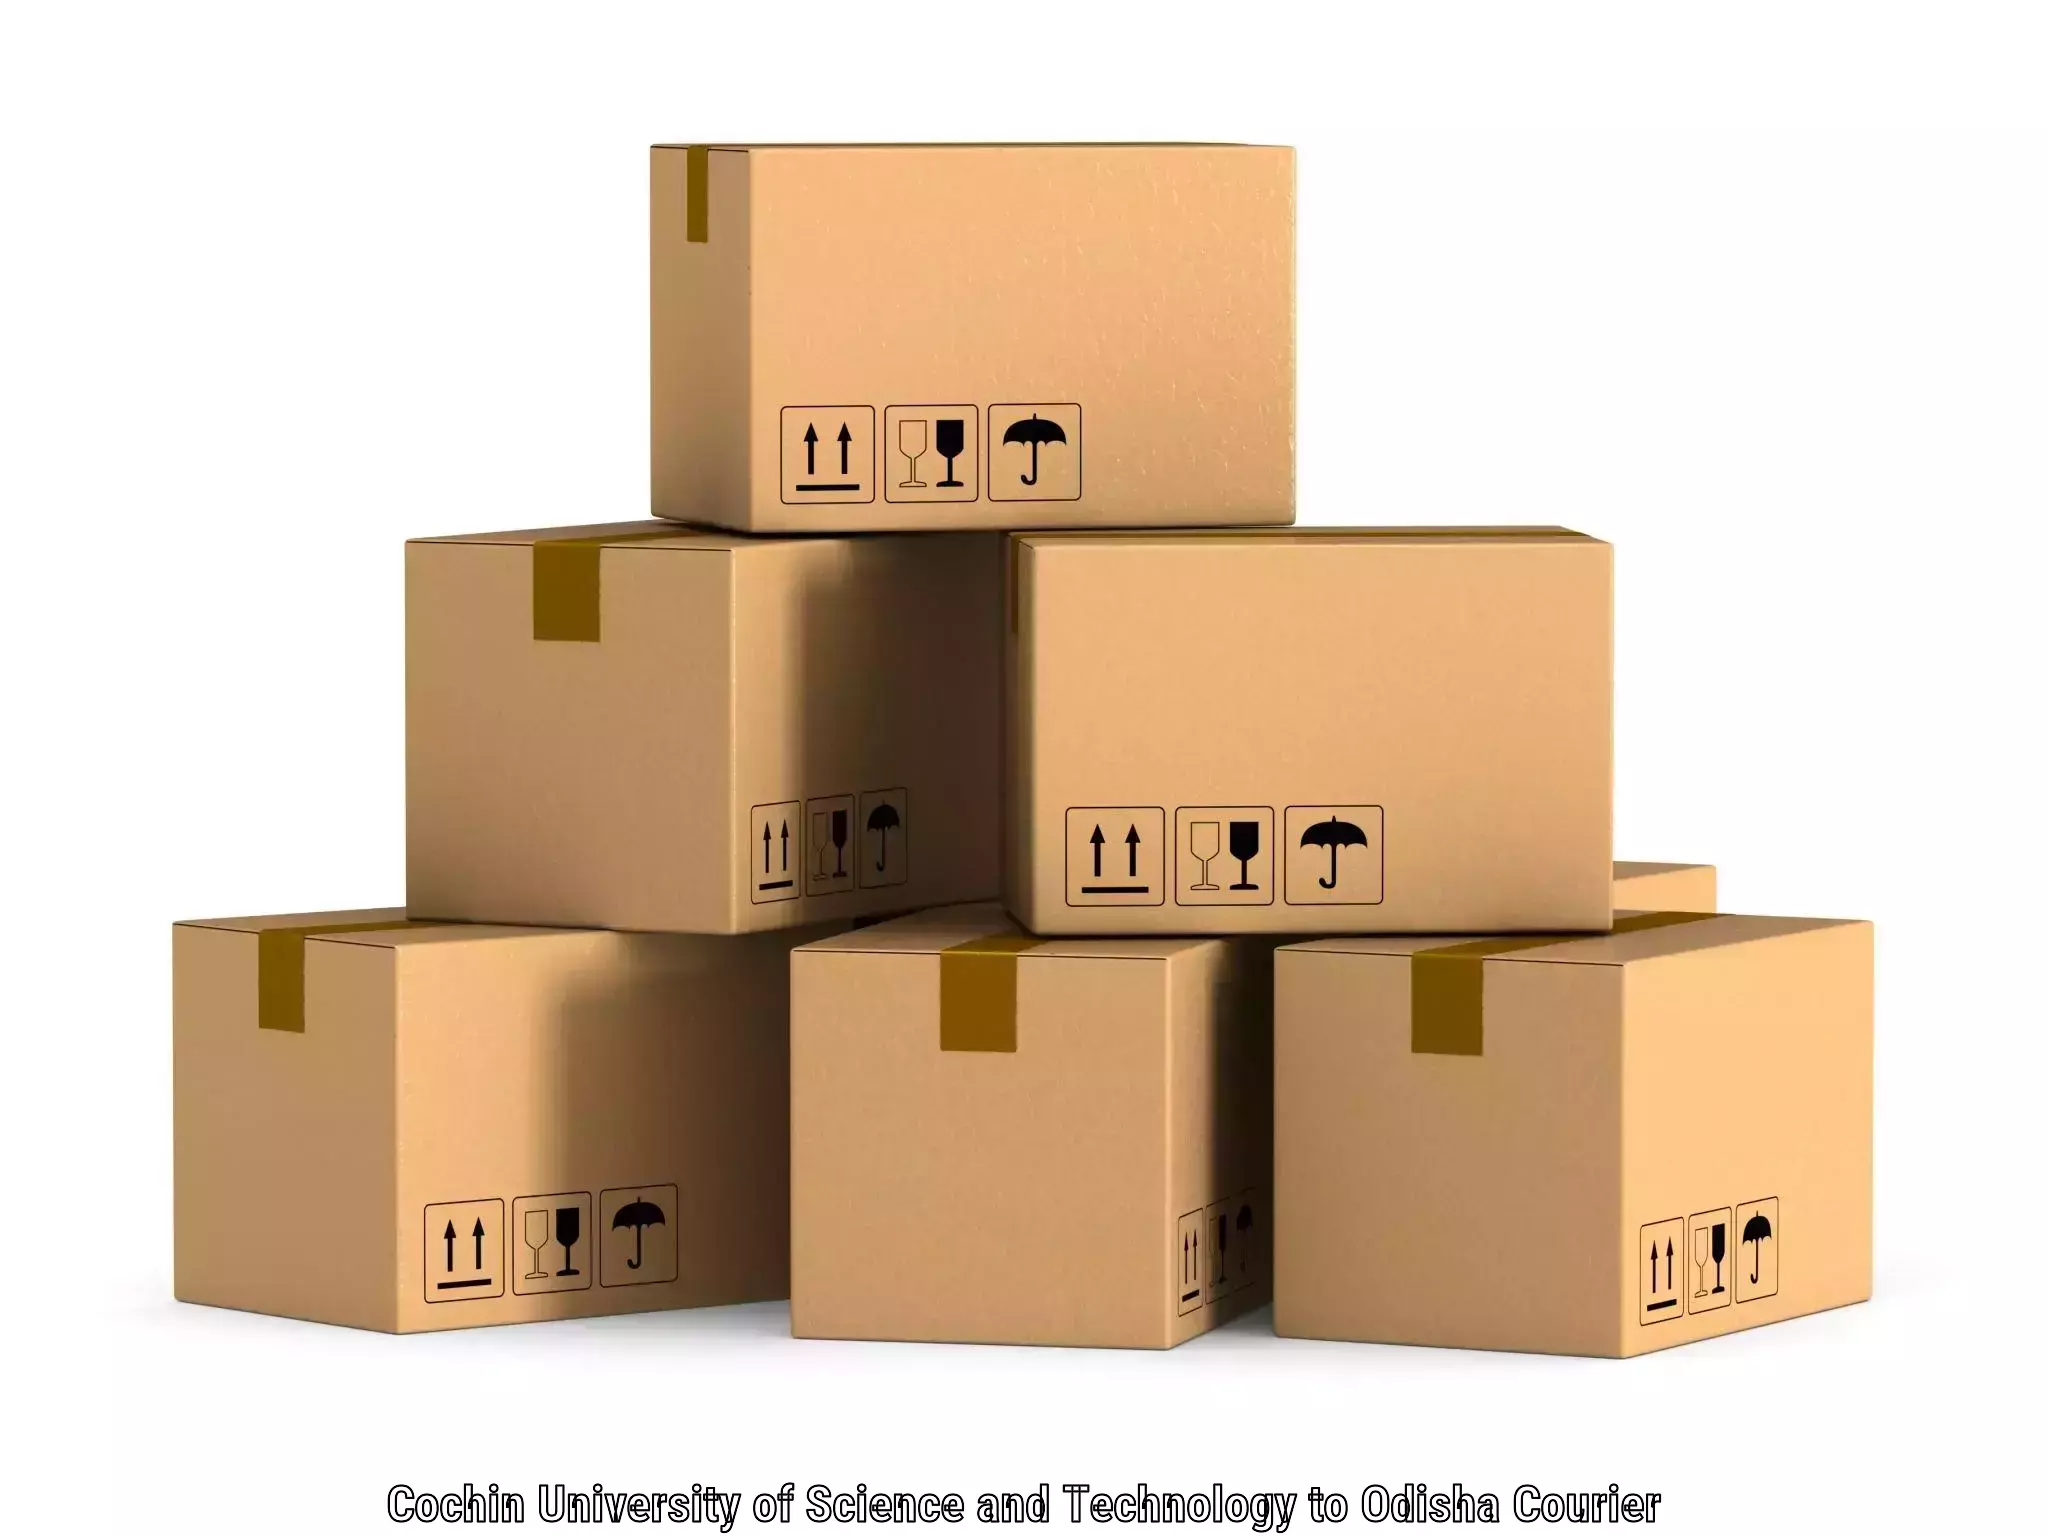 Online shipping calculator in Cochin University of Science and Technology to Kodala